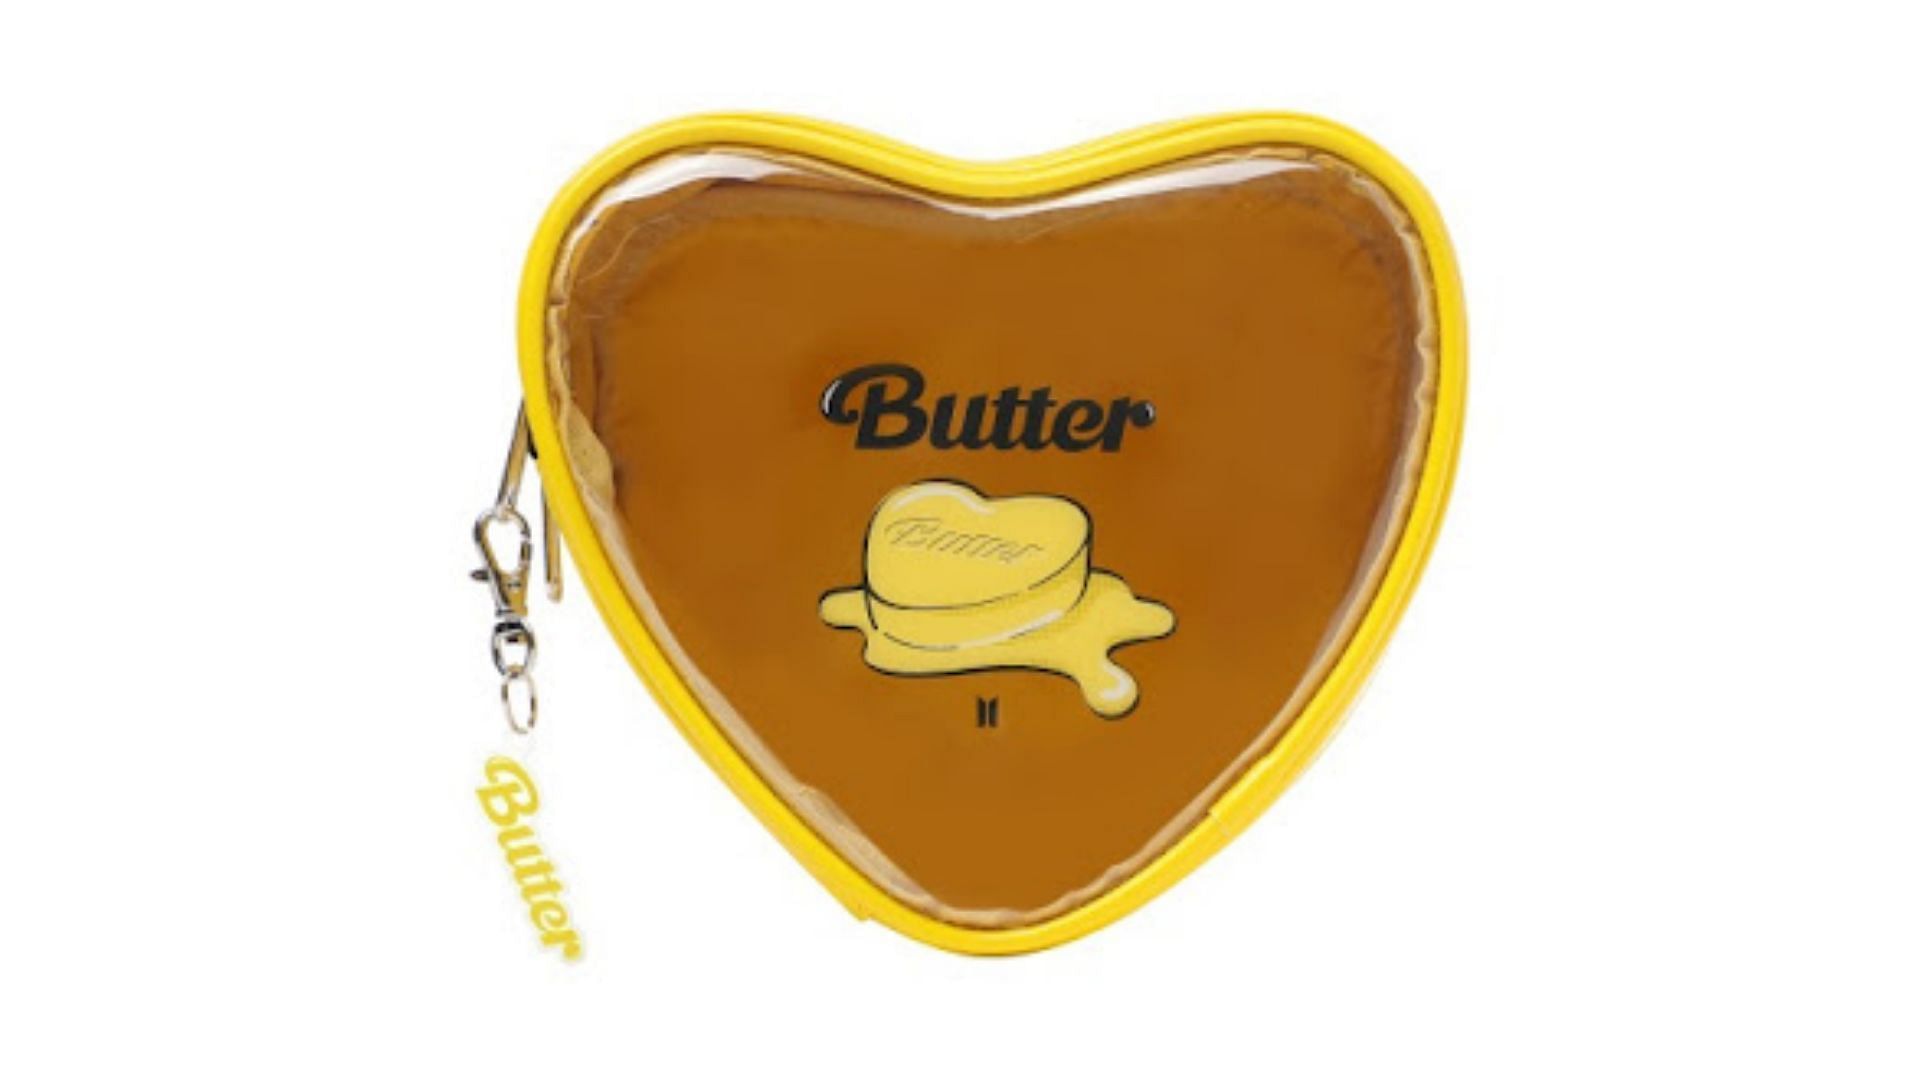 Butter Pouch for $29 (Image via Nordstrom)